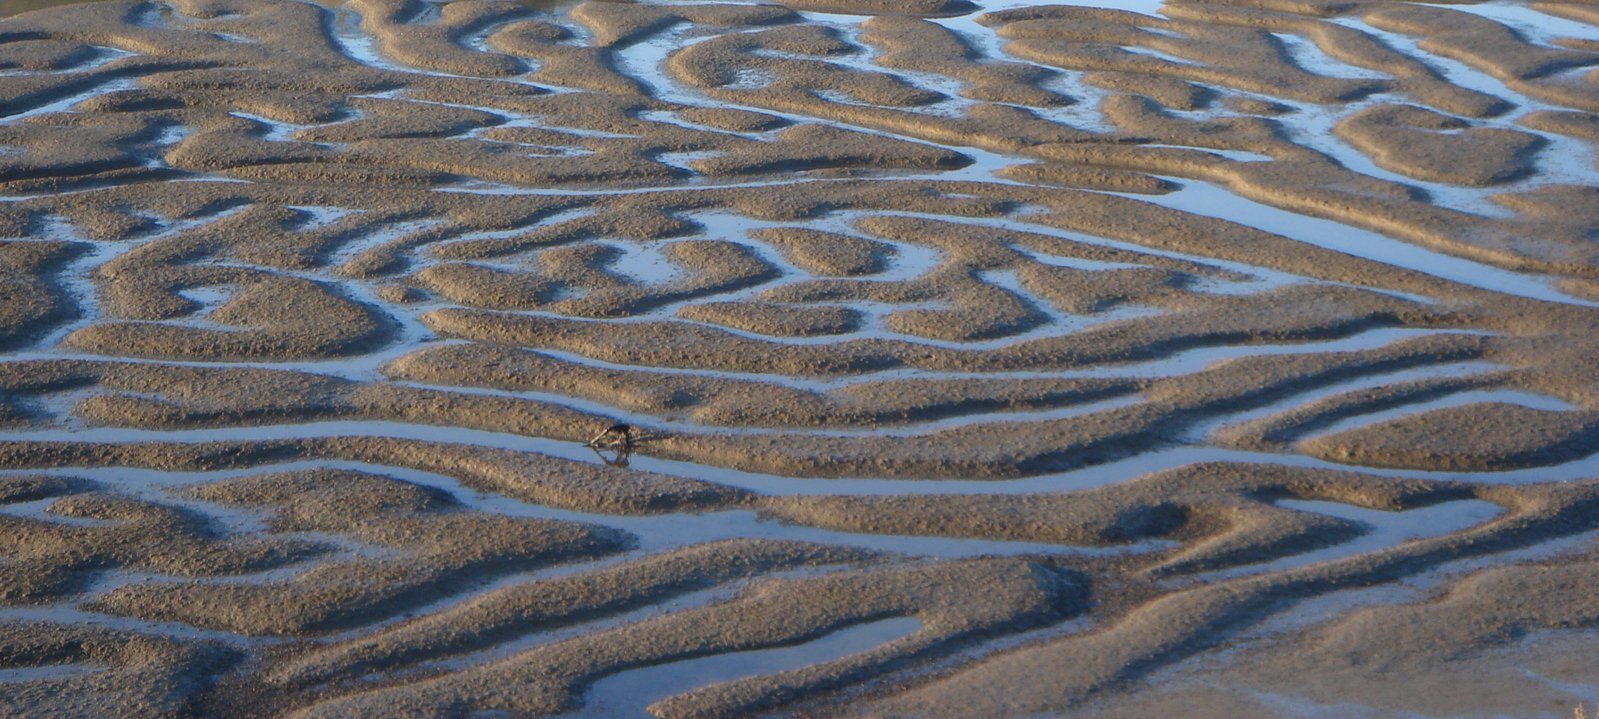 the sand and water are really wavy shaped